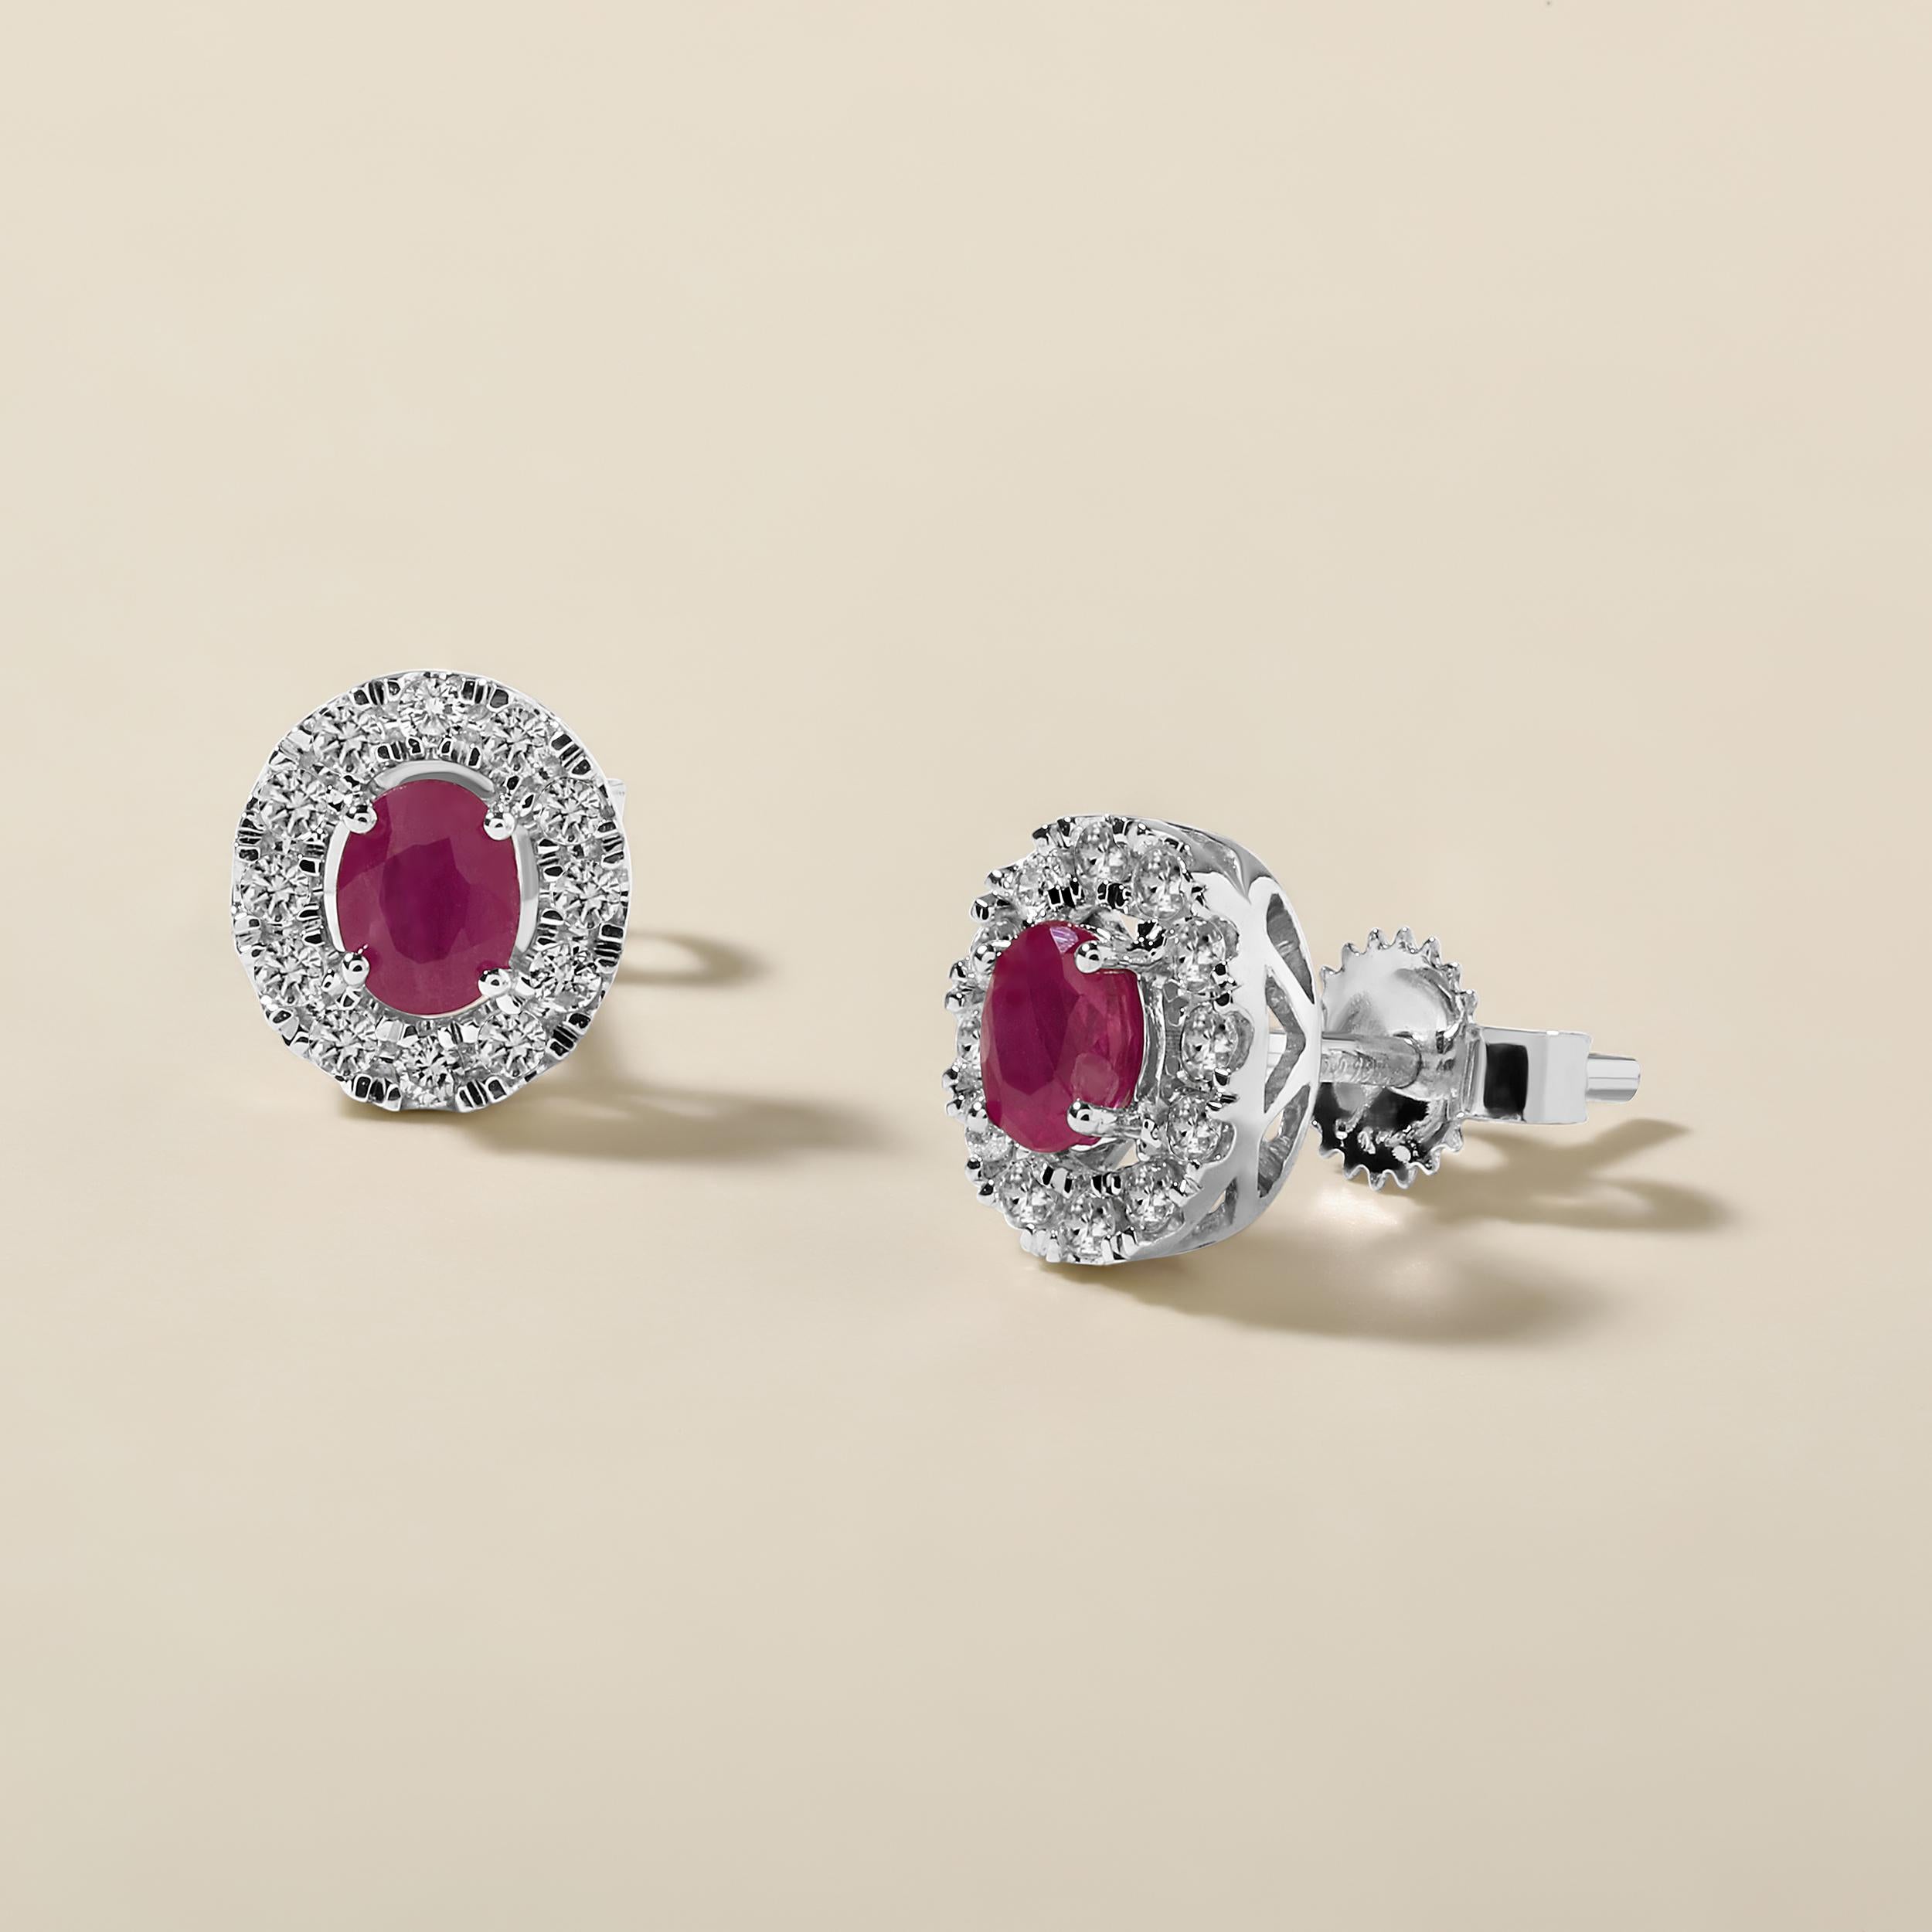 Crafted in 1.37 grams of 14K White Gold, the earrings contain 24 stones of Round Natural Diamonds with a total of 0.19 carat in F-G color and I1-I2 clarity combined with 2 stones of Oval Shaped Natural Ruby Gemstones with a total of 0.52